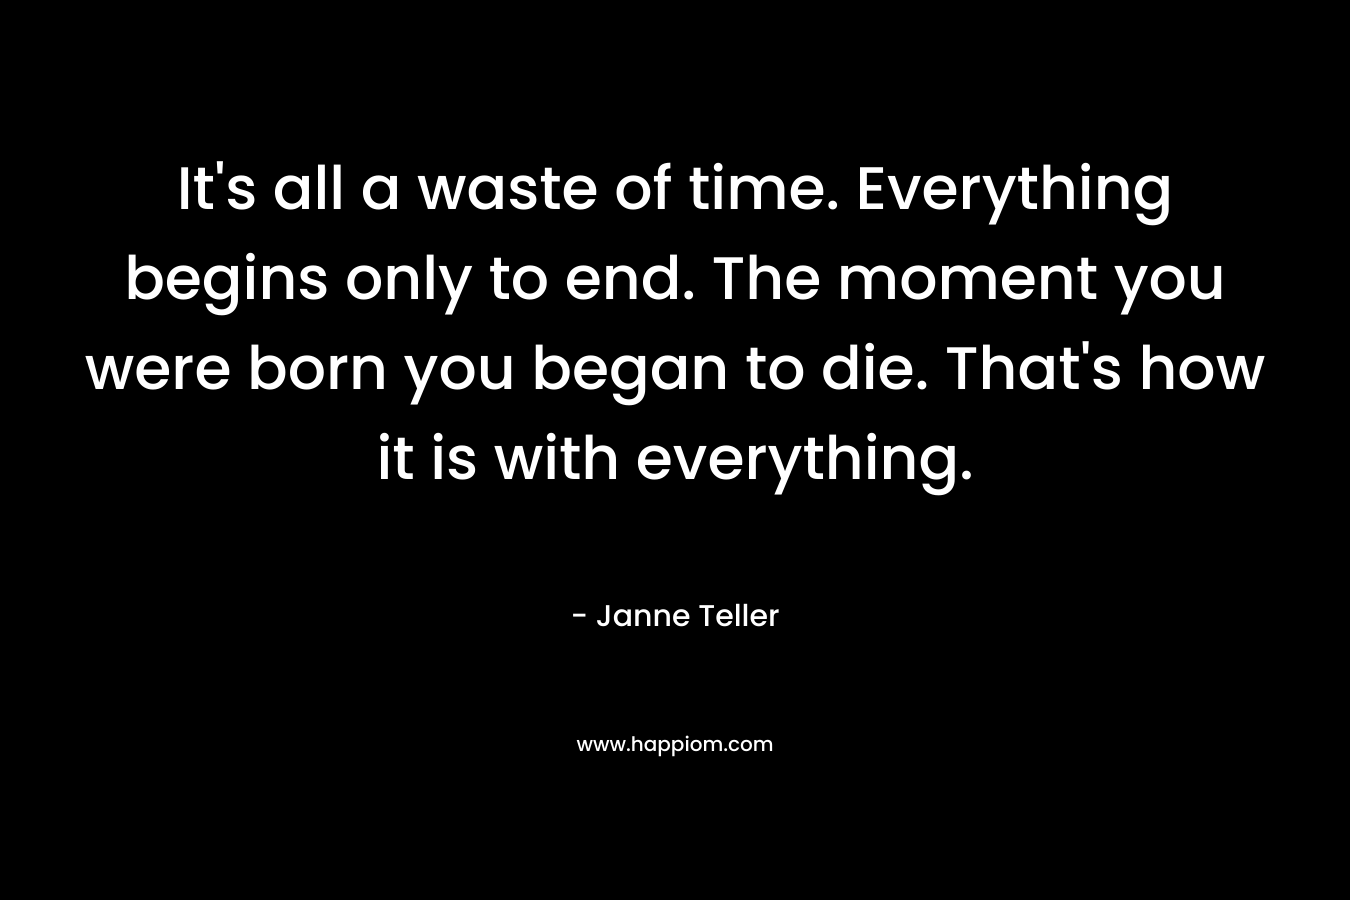 It’s all a waste of time. Everything begins only to end. The moment you were born you began to die. That’s how it is with everything. – Janne Teller